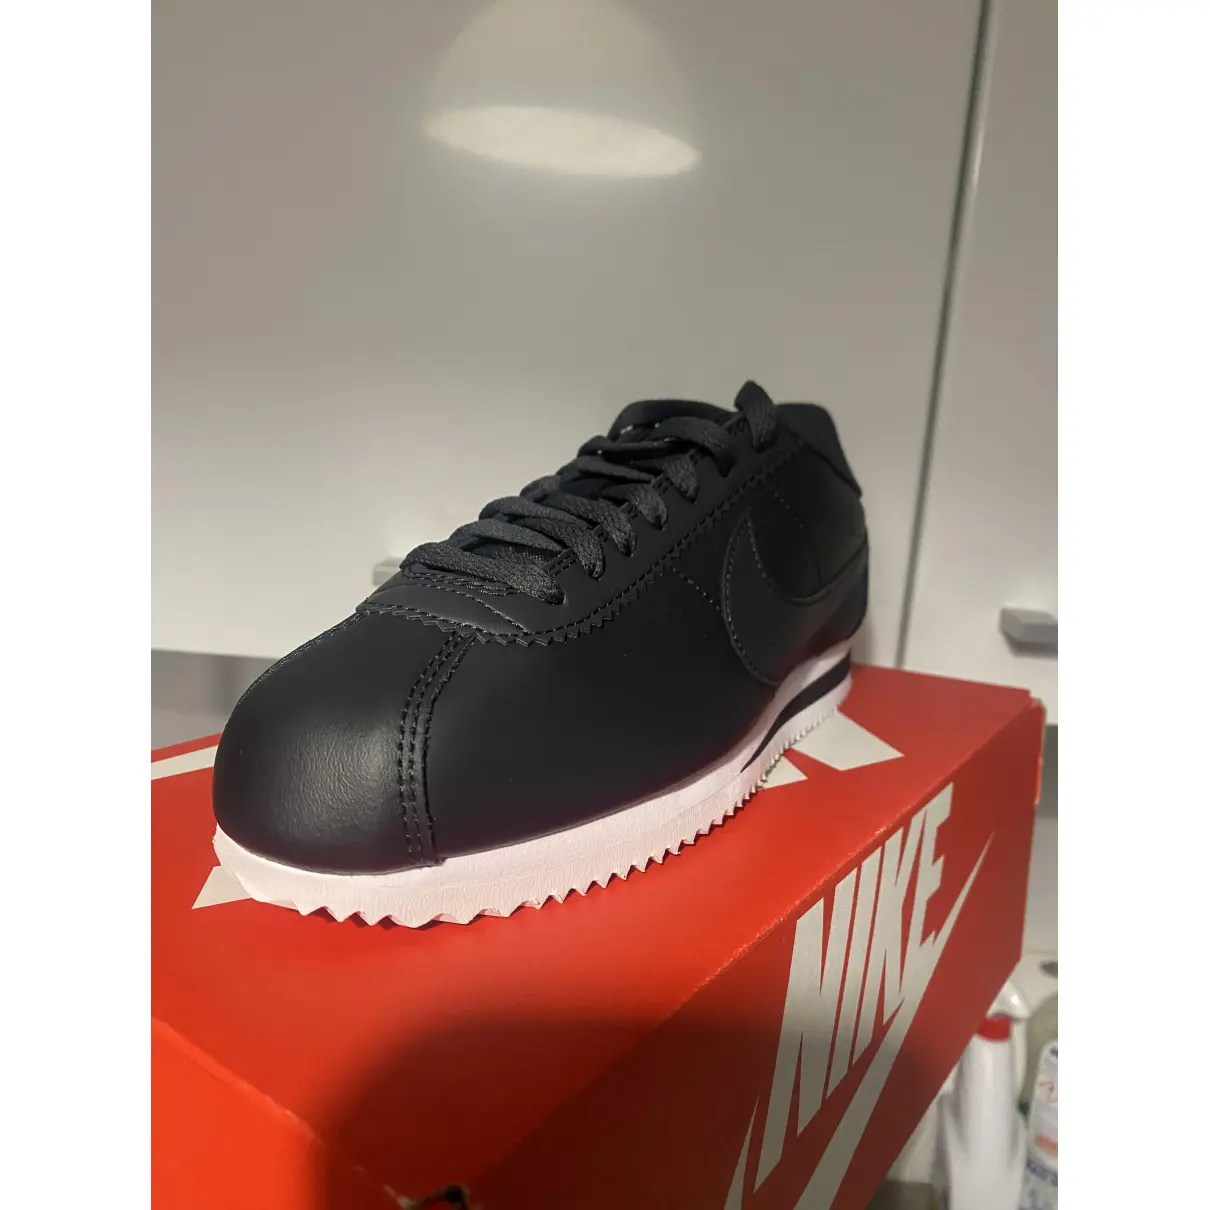 Buy Nike Cortez leather trainers online